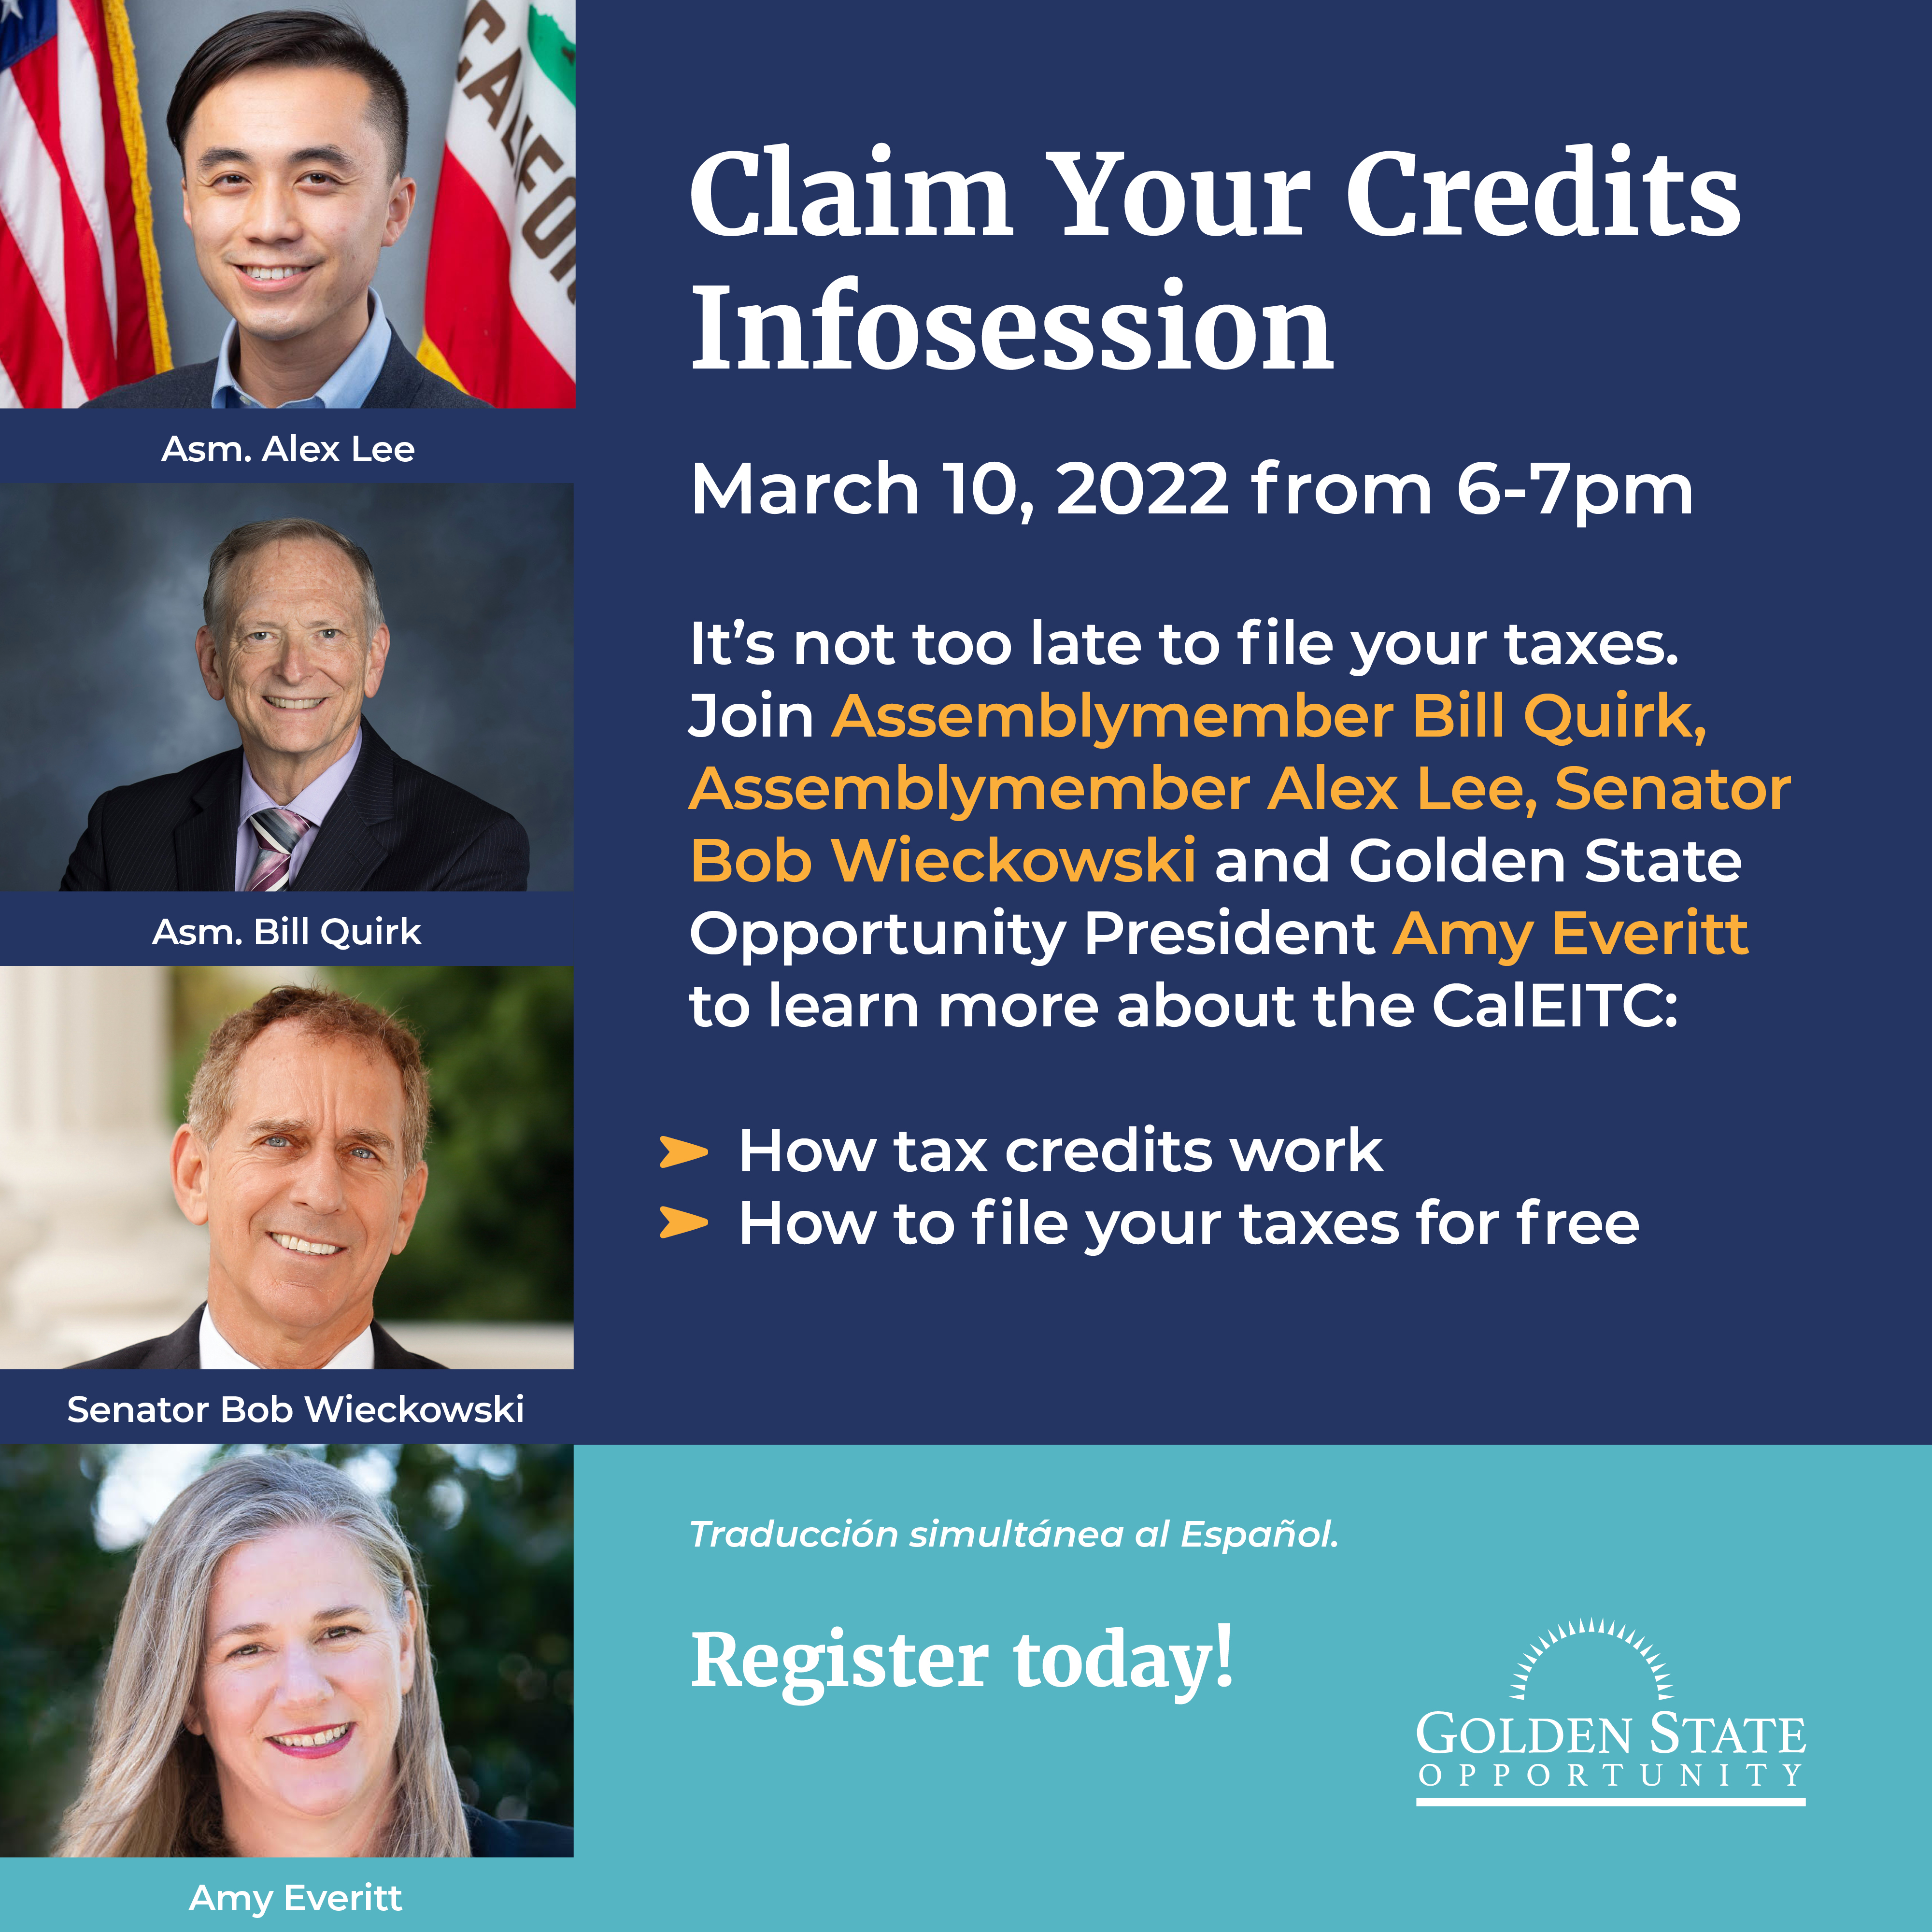 Claim Your Credits Info Session on March 10